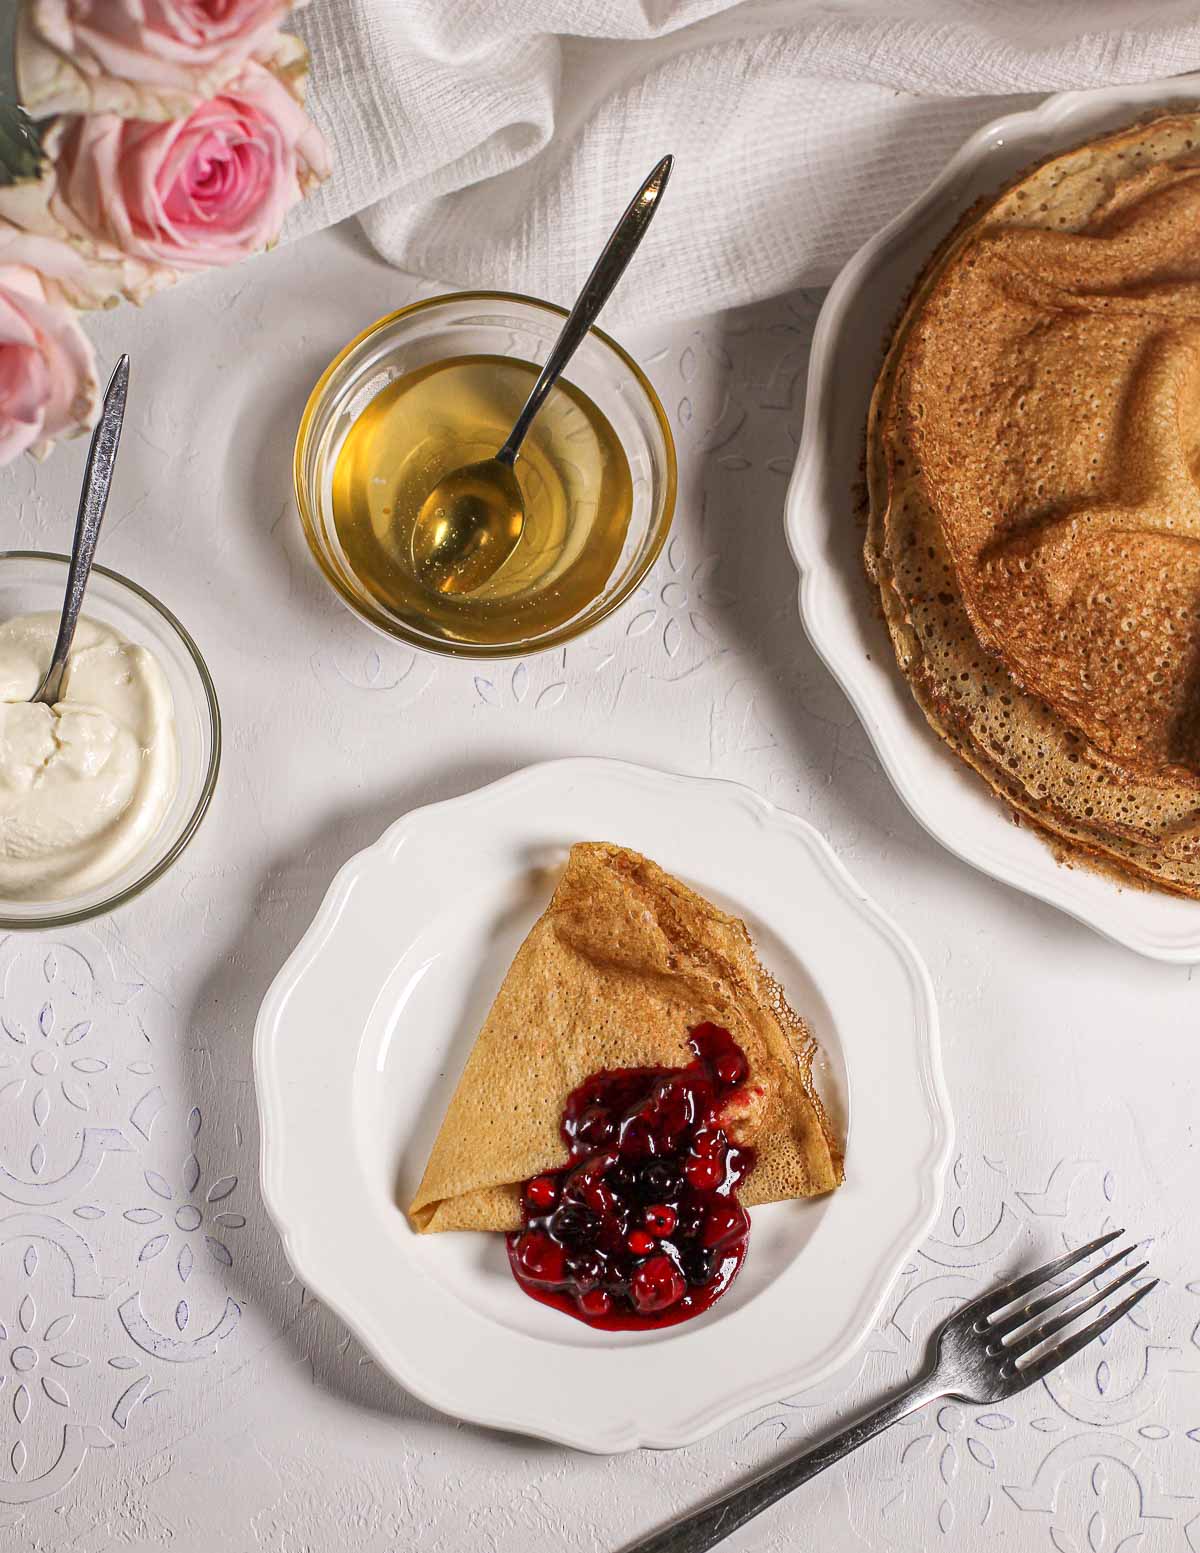 Table with a plate of buttermilk crepes with berry compote and honey